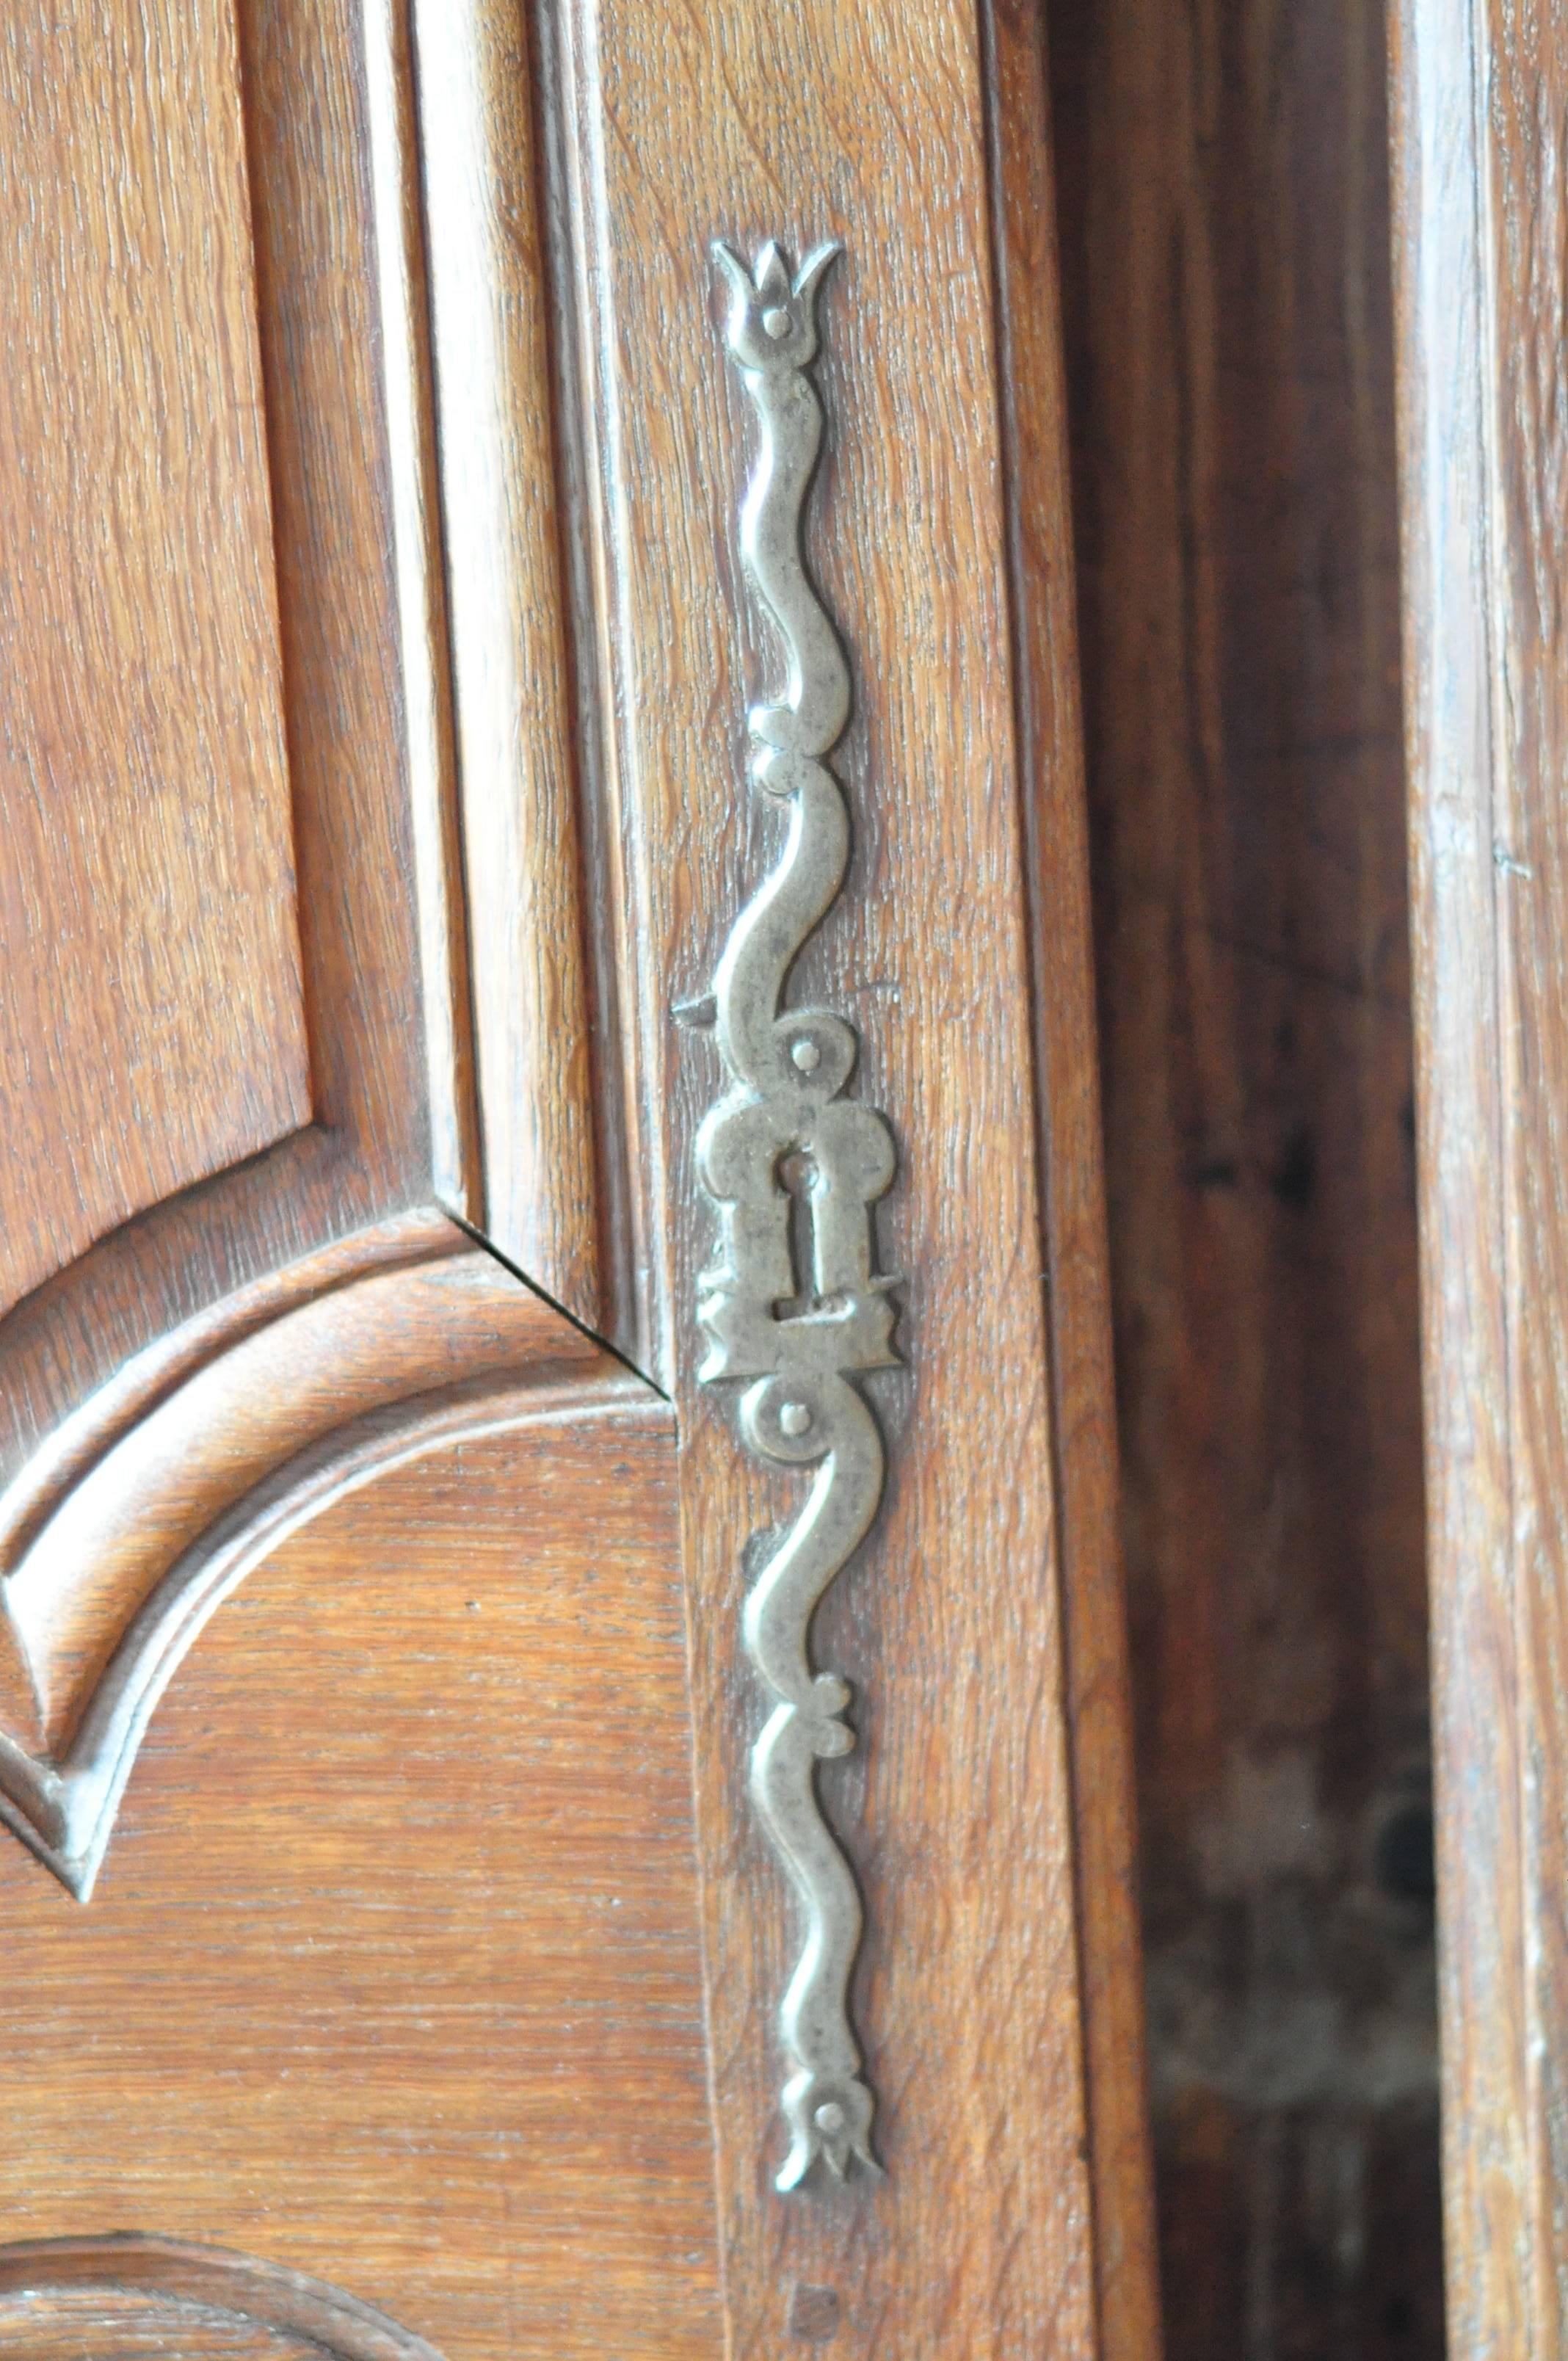 Stunning pair of oak doors in excellent condition featuring a remarkable lock. All hardware included.